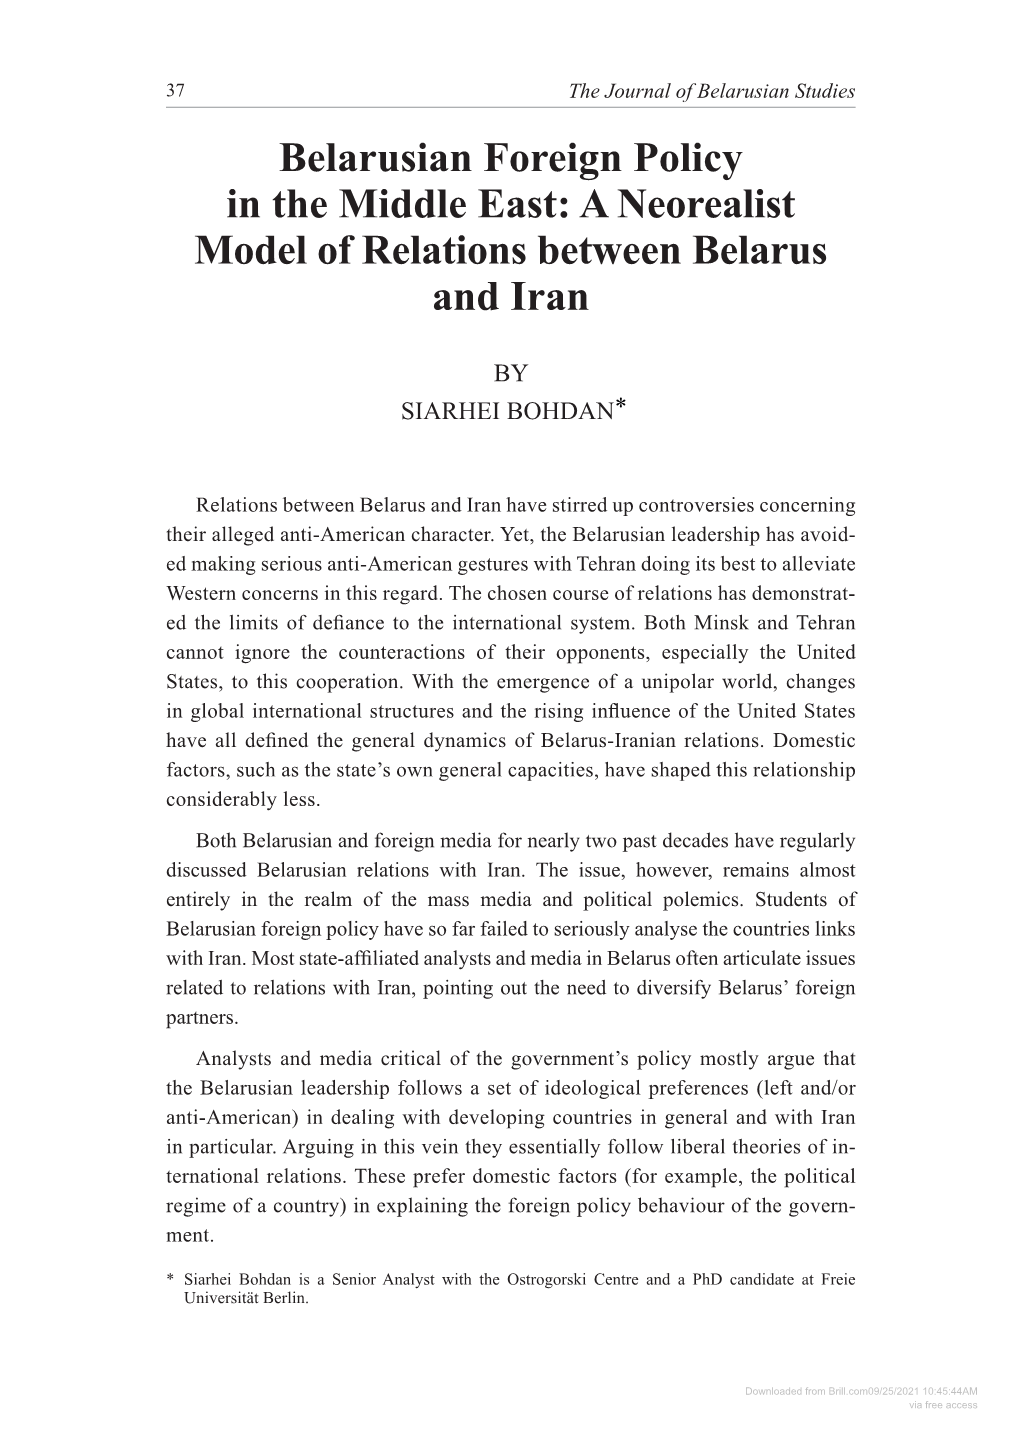 Belarusian Foreign Policy in the Middle East: a Neorealist Model of Relations Between Belarus and Iran